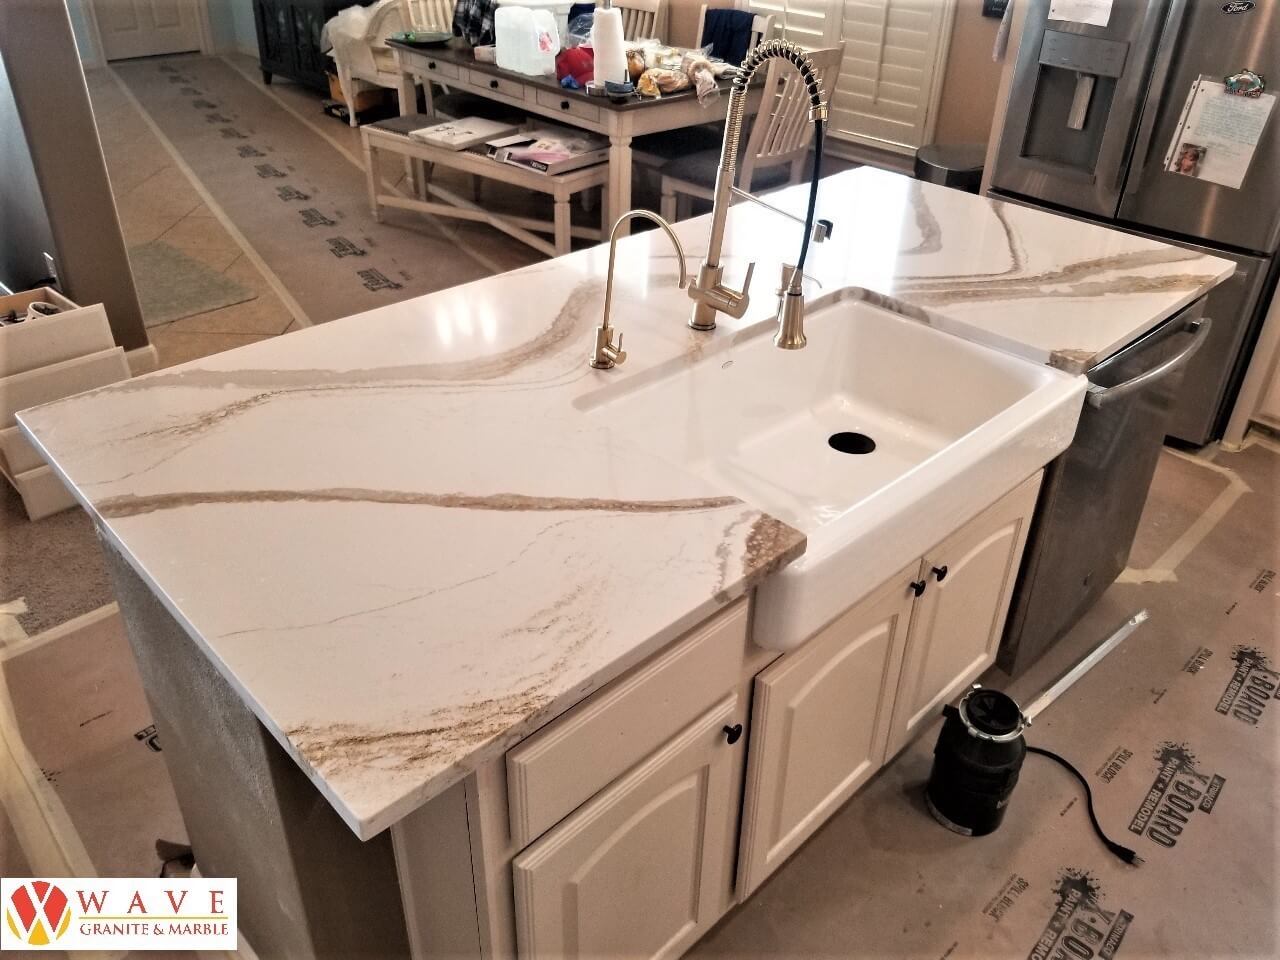 we pride ourselves with our work done in many quartz countertops Houston homes